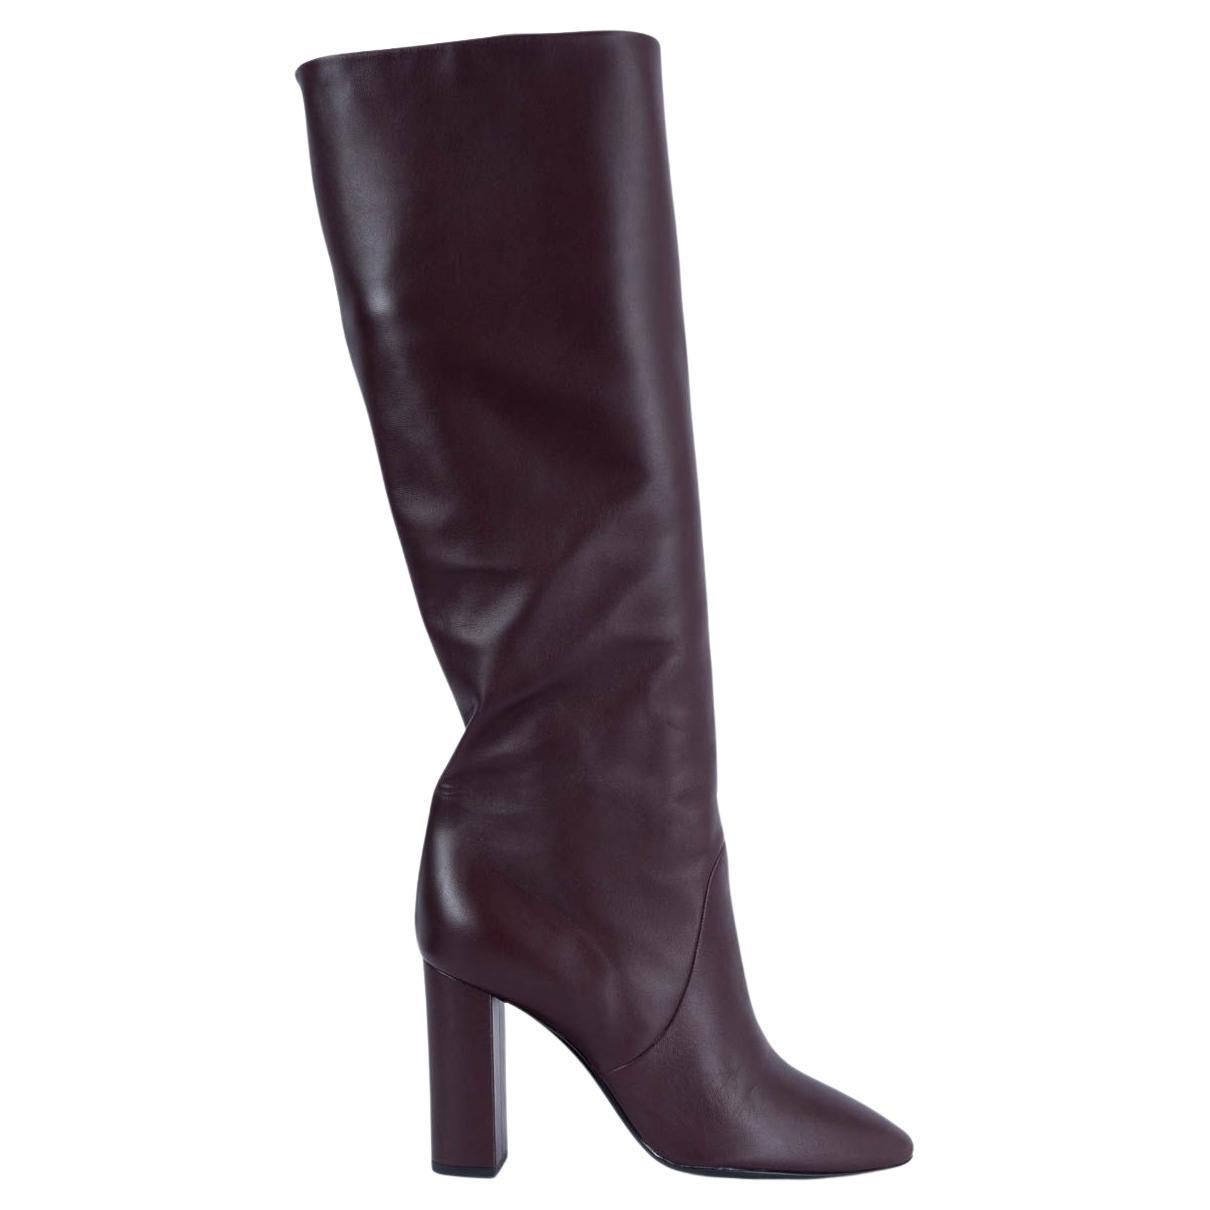 SAINT LAURENT burgundy leather LOU 96 Knee High Boots Shoes 37.5 For Sale